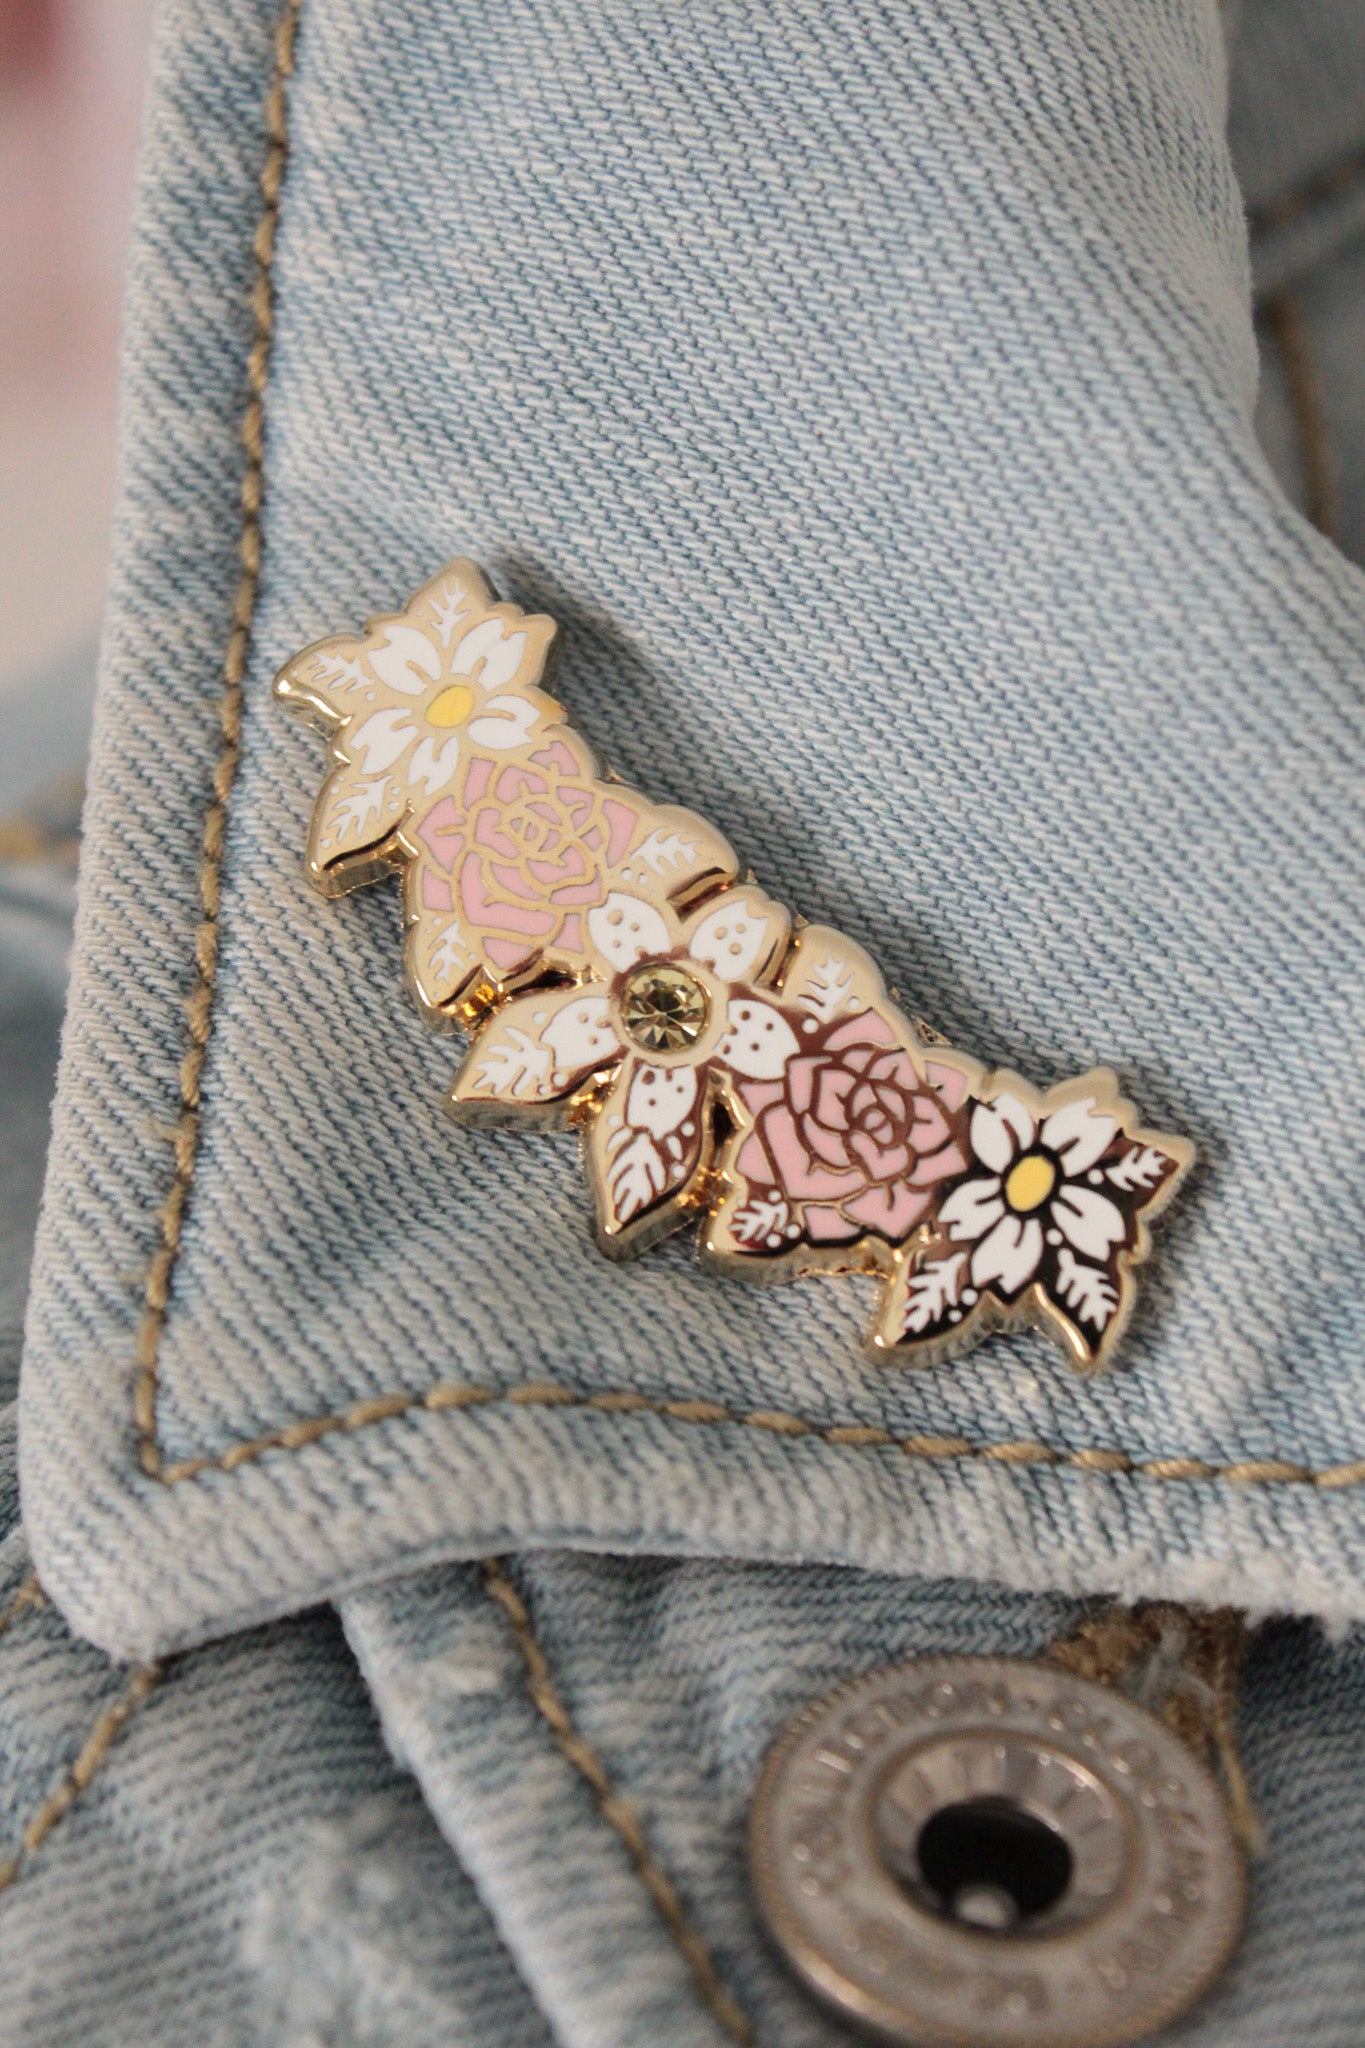 Blooming Beauty: Floral Wreath Enamel Pin - Elegant accessory for shirts, blouses, jackets and more!